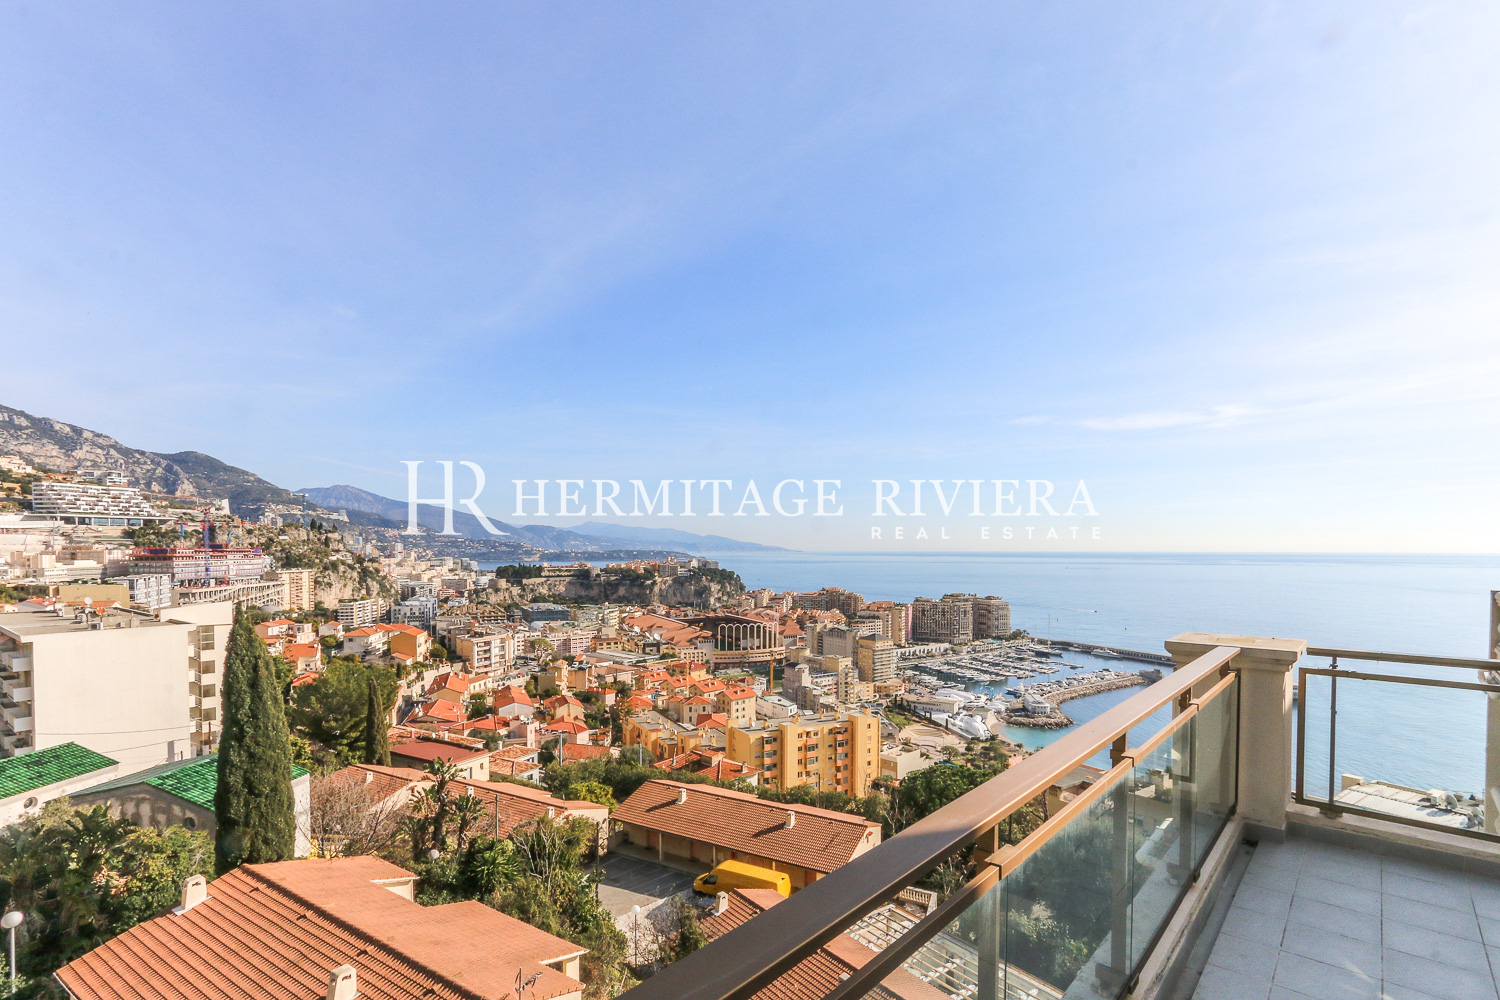 Apartment to renovate with views over Monaco (image 4)